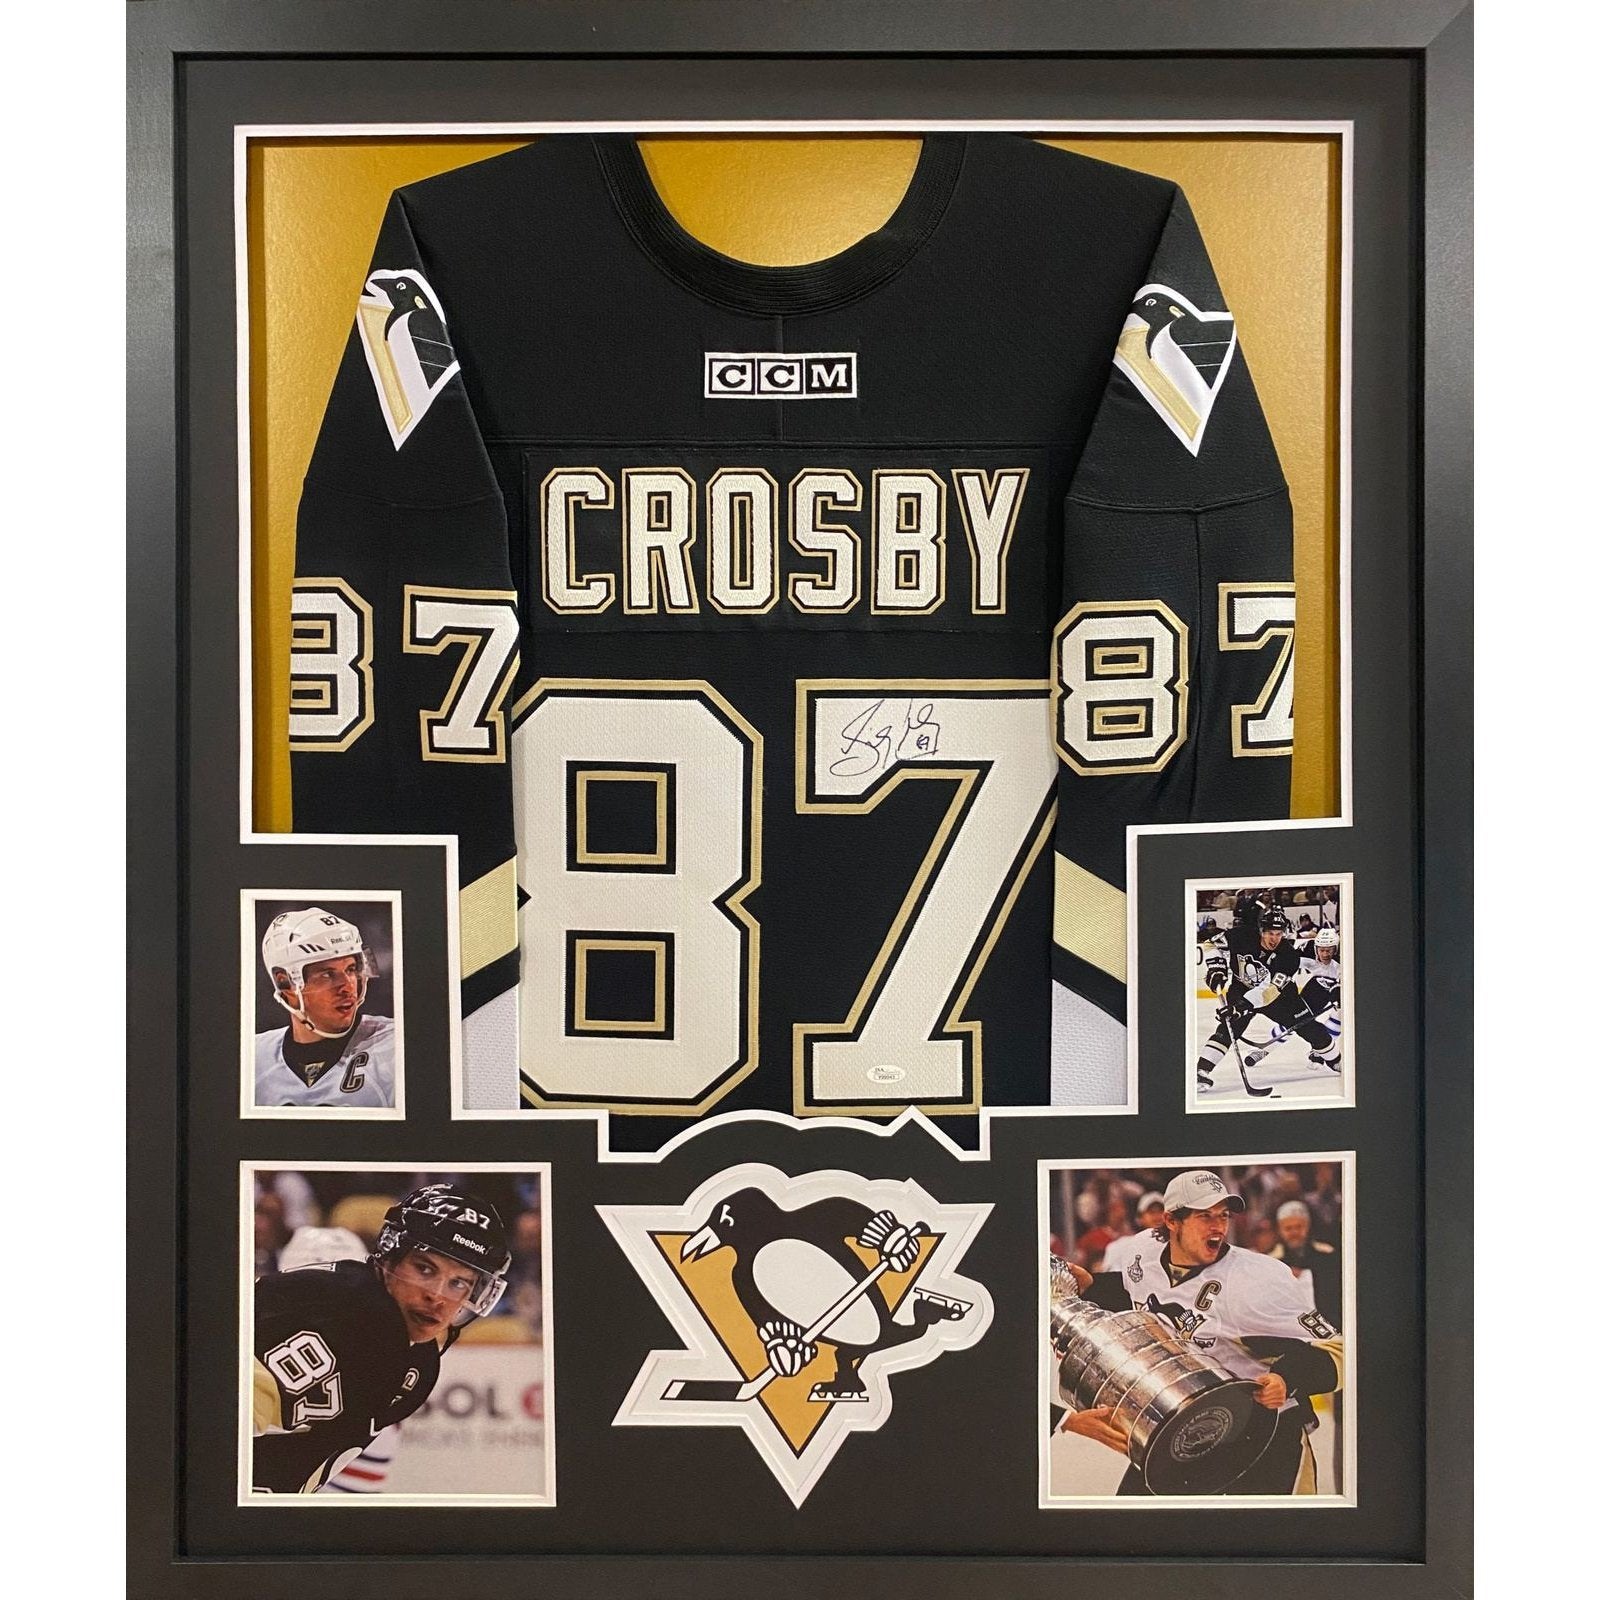 Sidney Crosby Autographed Pittsburgh Penguins Adidas Jersey